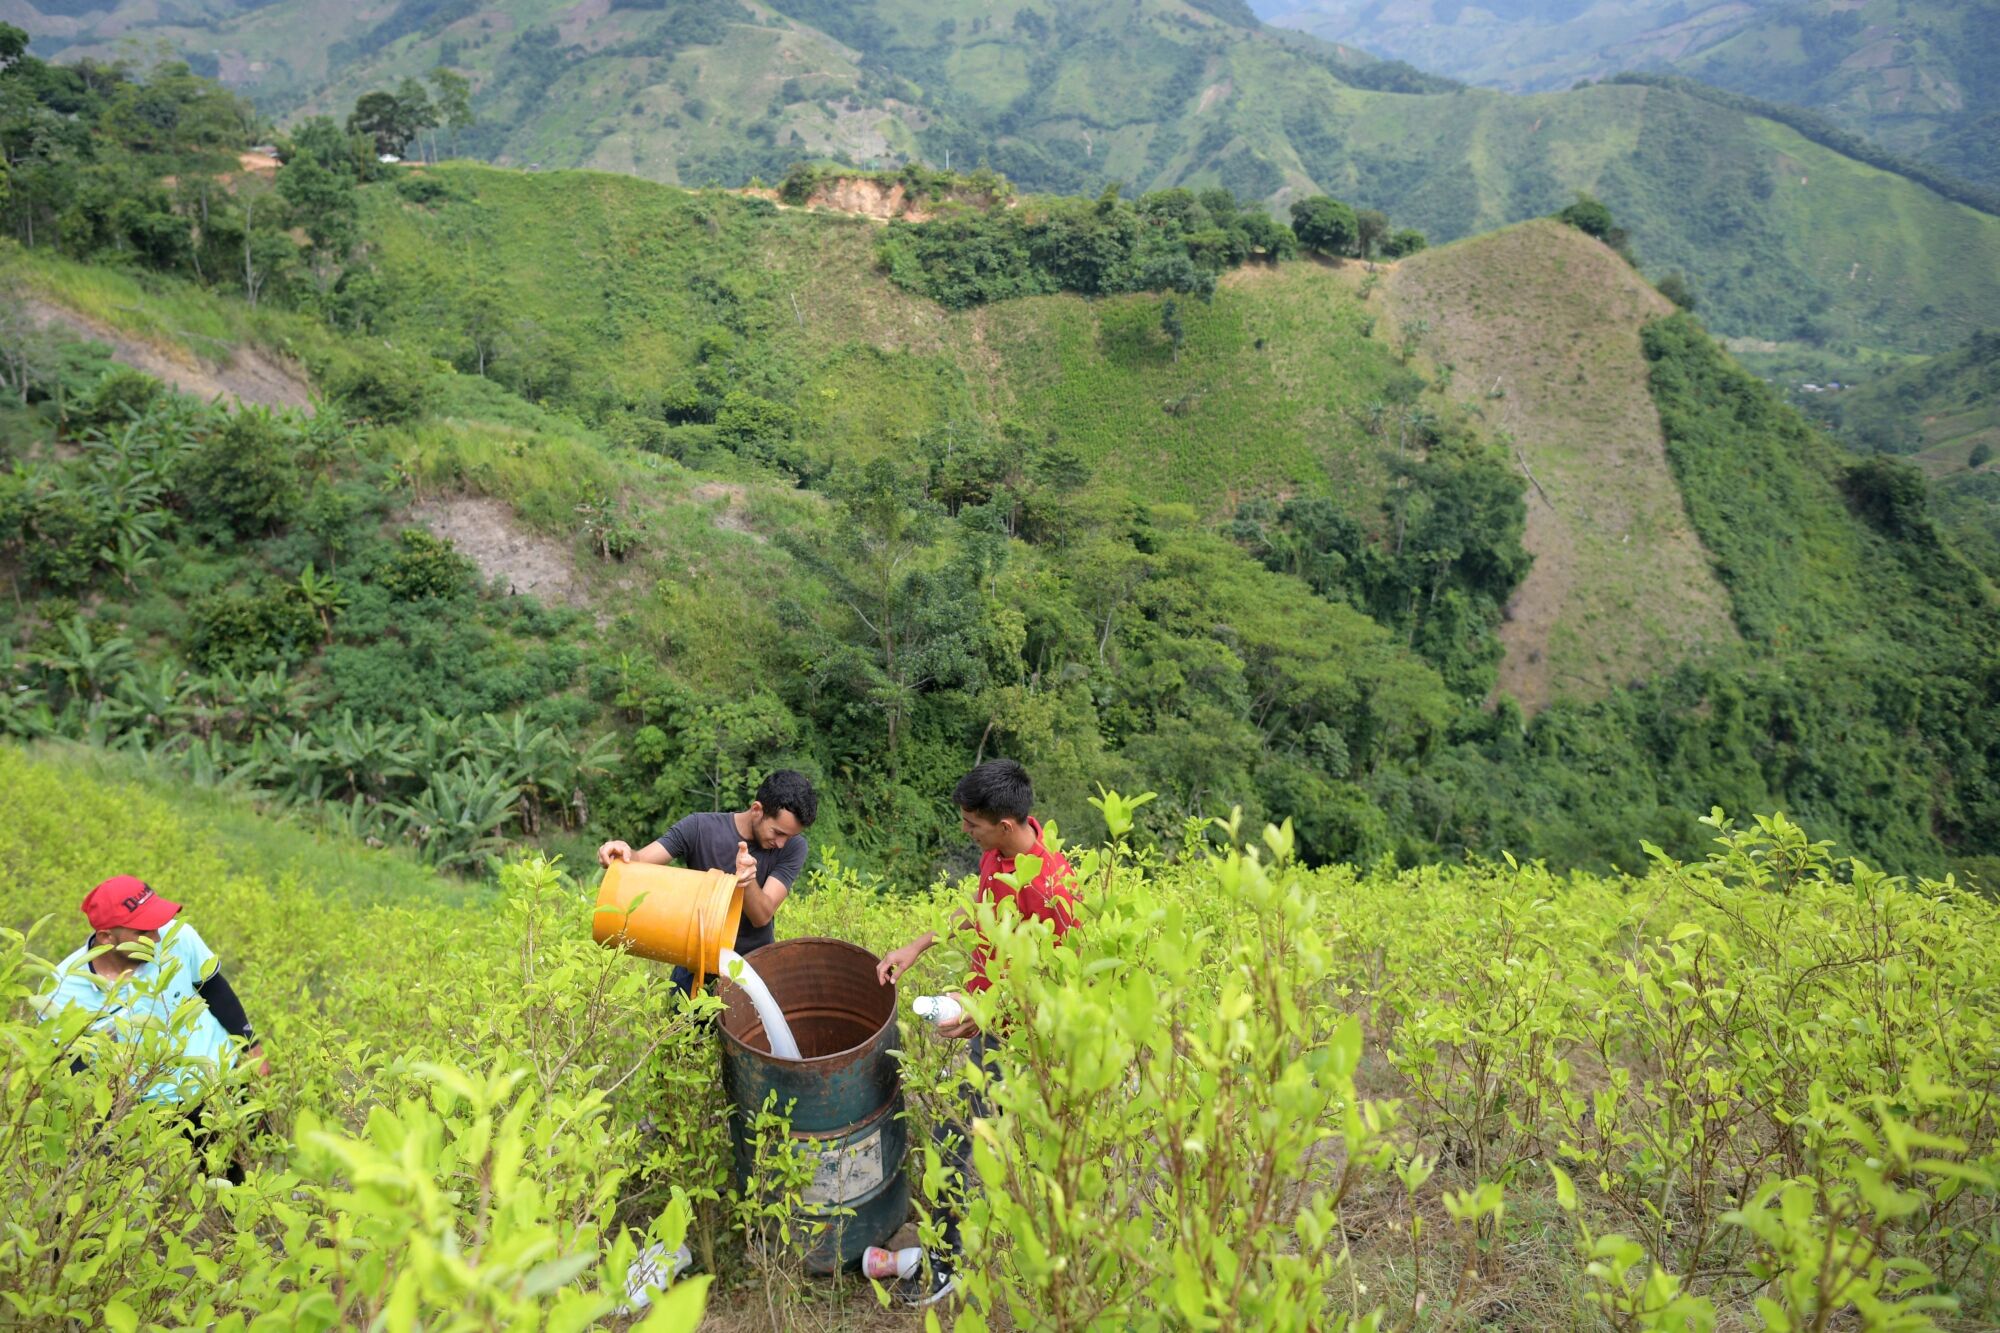 A man prepares to fumigate coca crops in a green leafy field in front of hills.